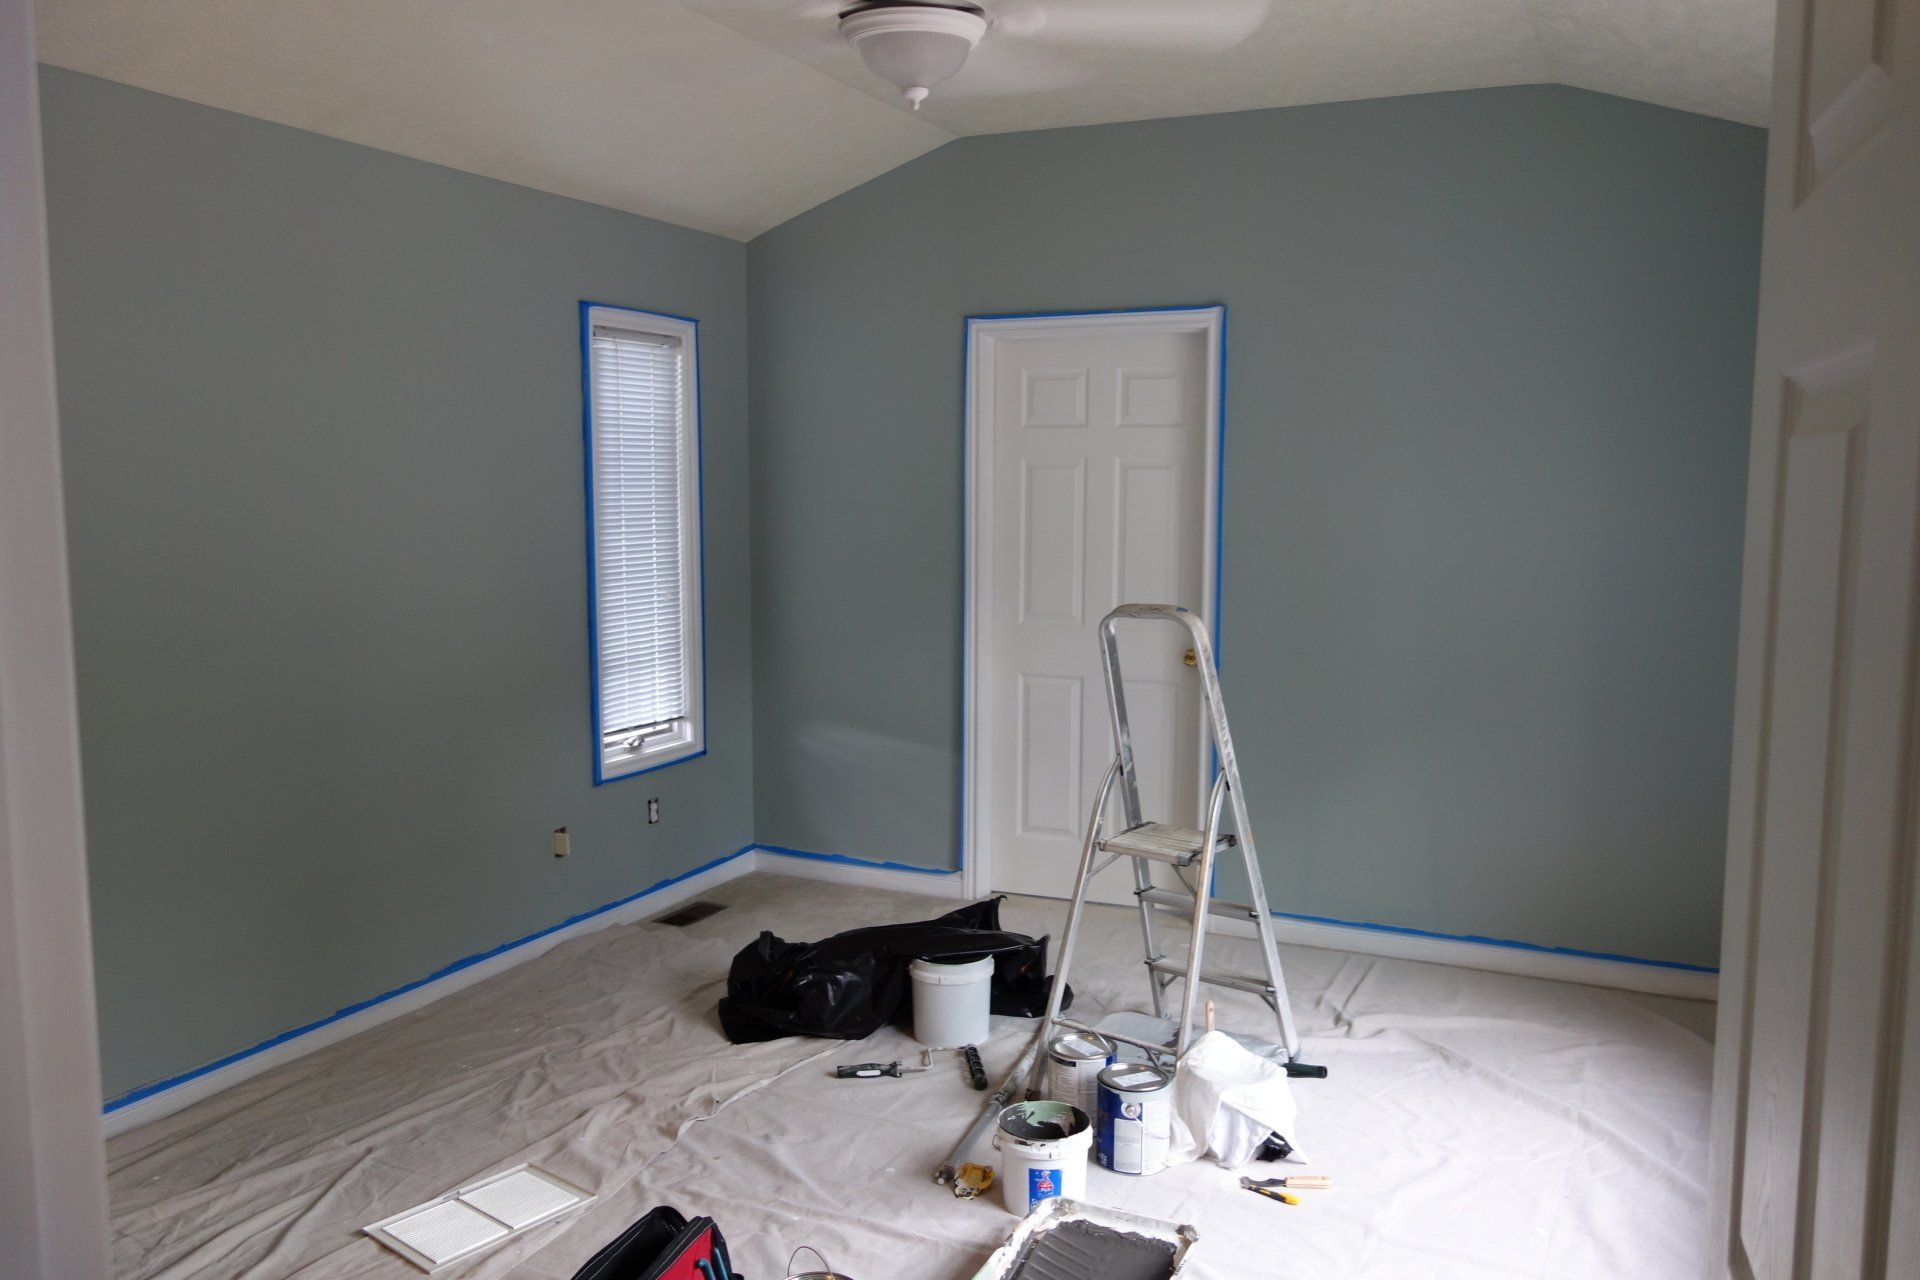 An interior view of a bedroom with freshly painted walls in a soothing shade of blue.